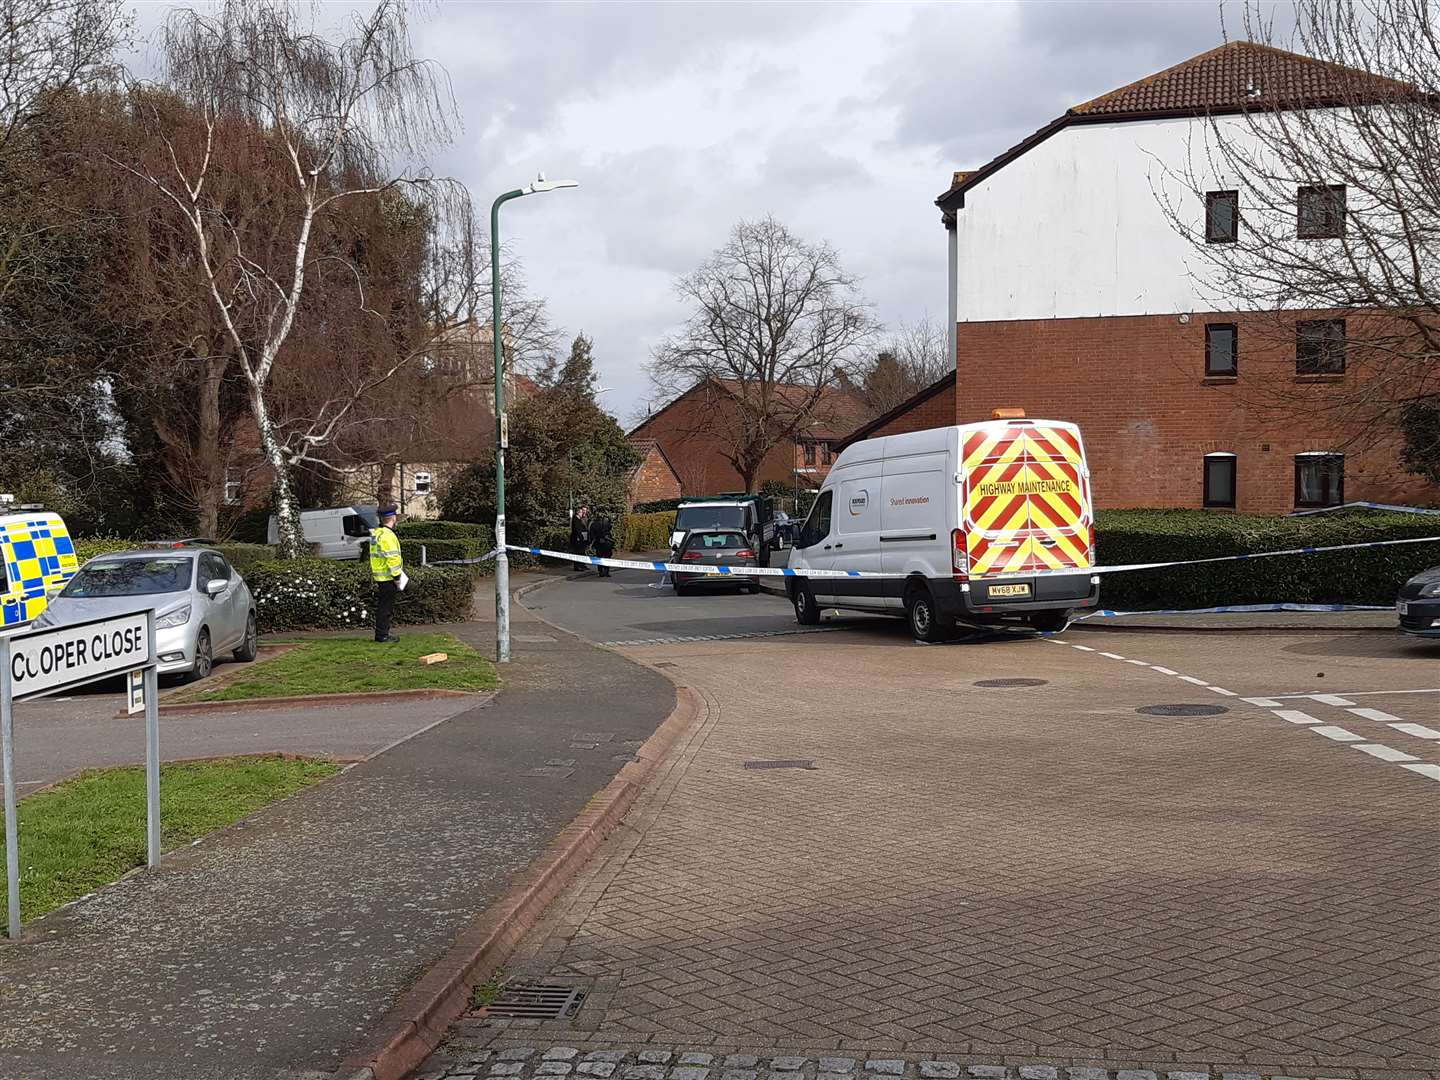 Police cordoned off an area outside Cooper Close, Greenhithe.